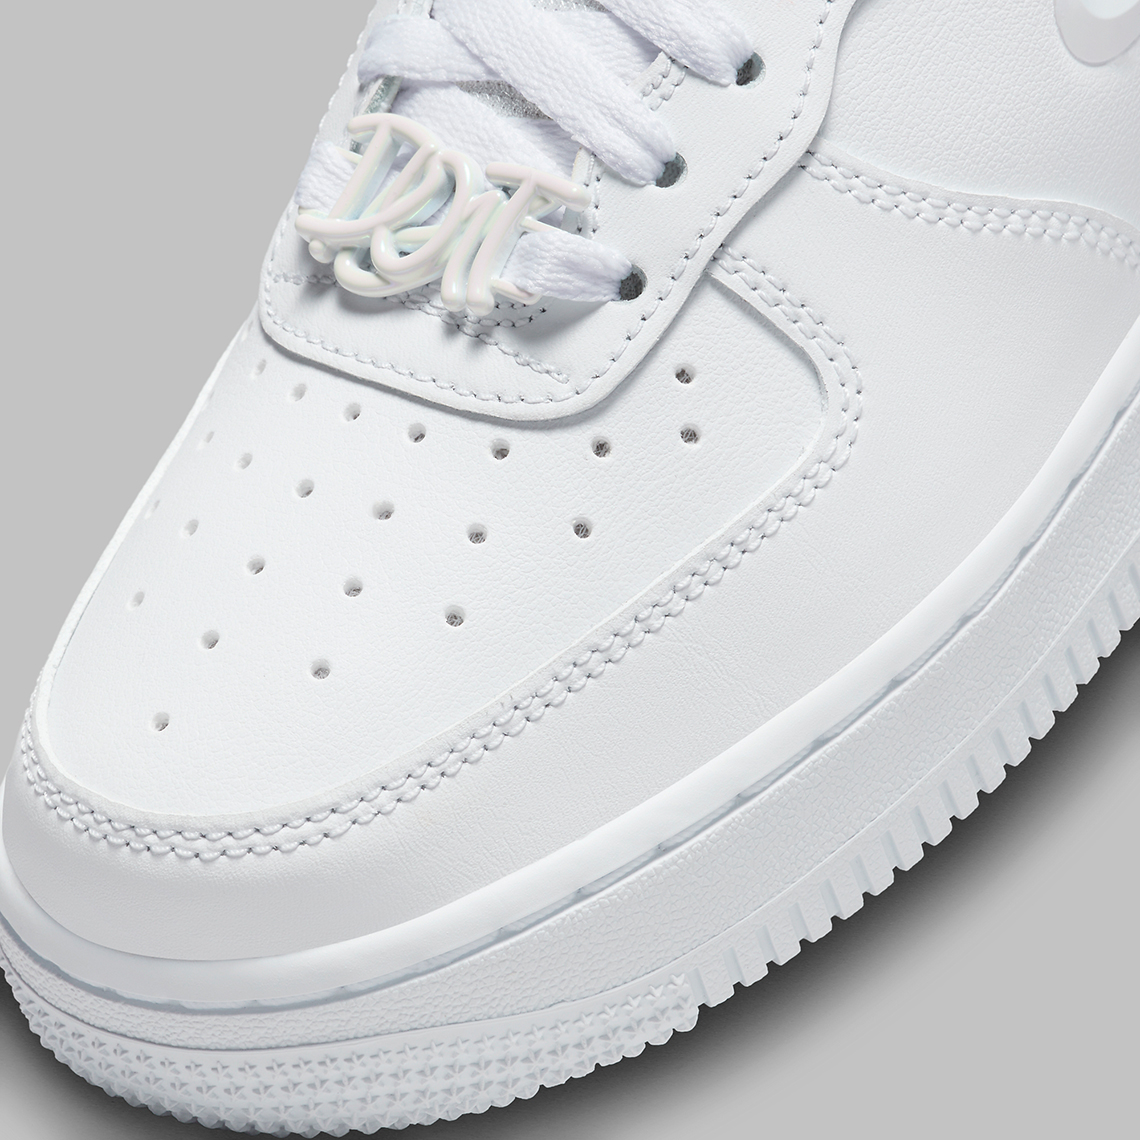 Nike Air Force 1 Low Womens Just Do It Fb8251 100 8